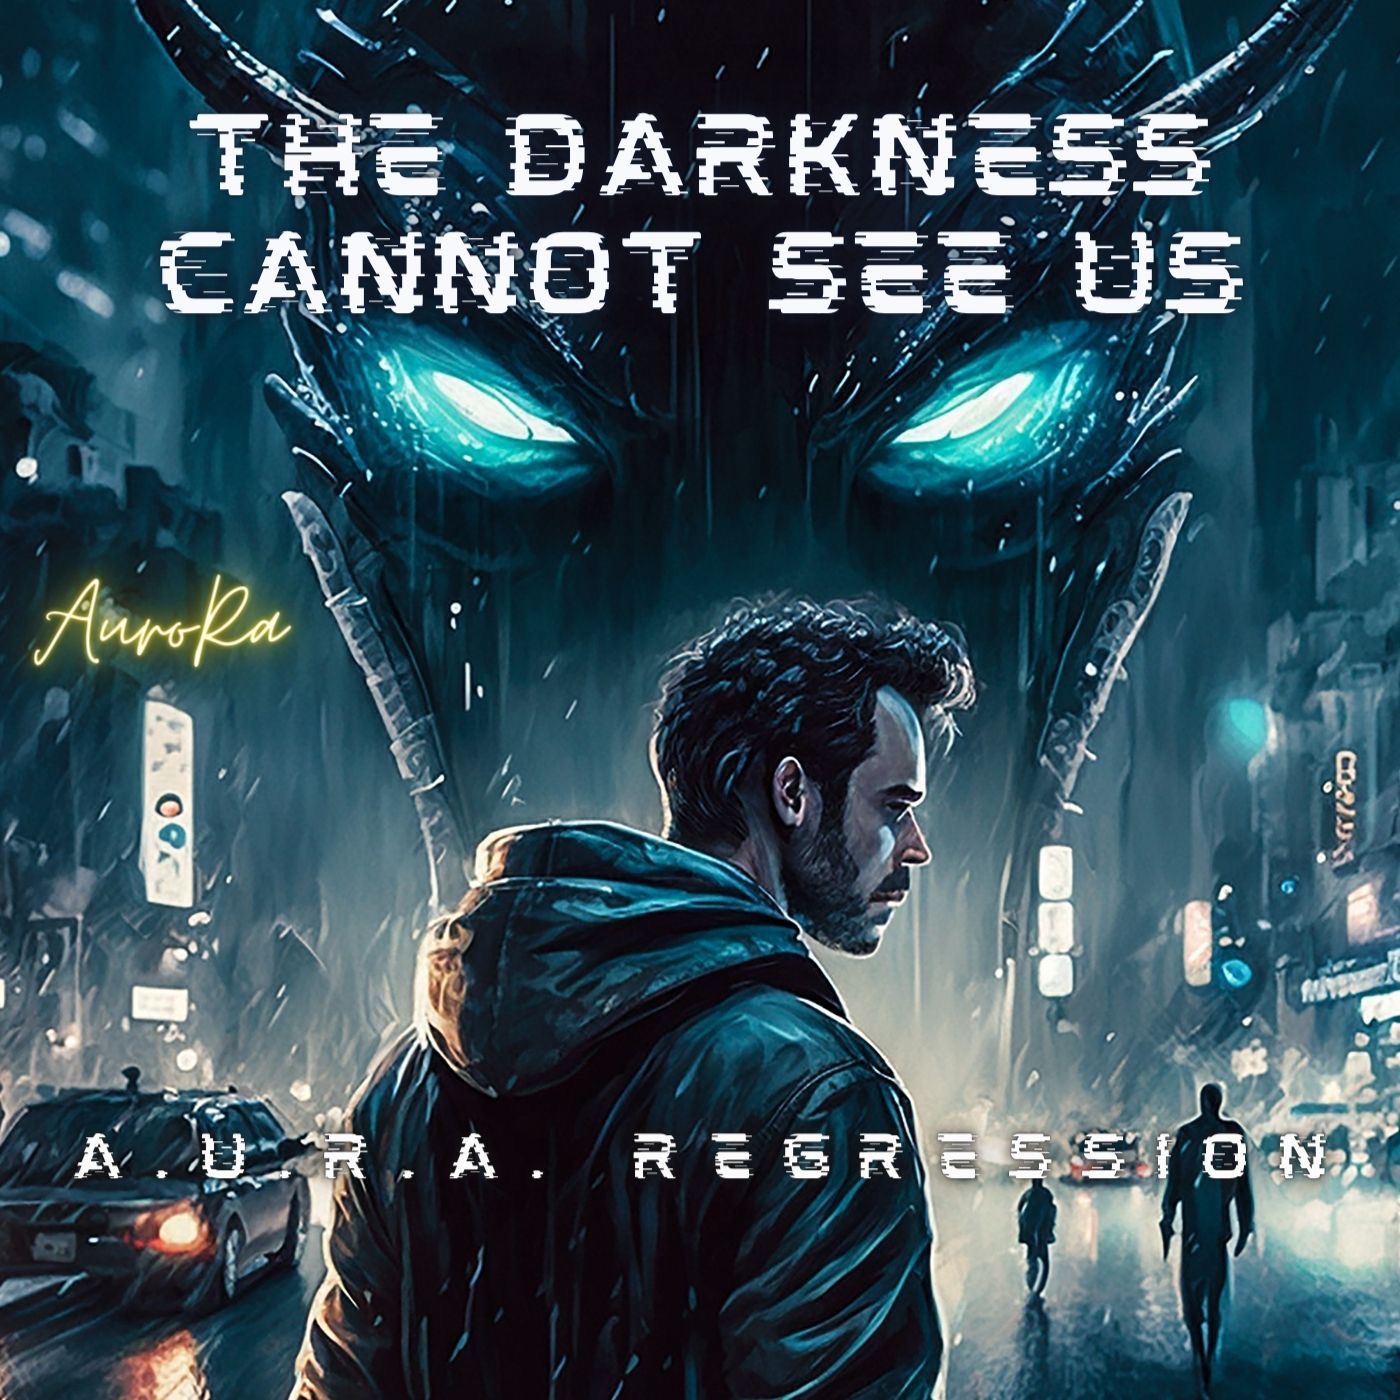 The Darkness Cannot See Us | A.U.R.A. Regression